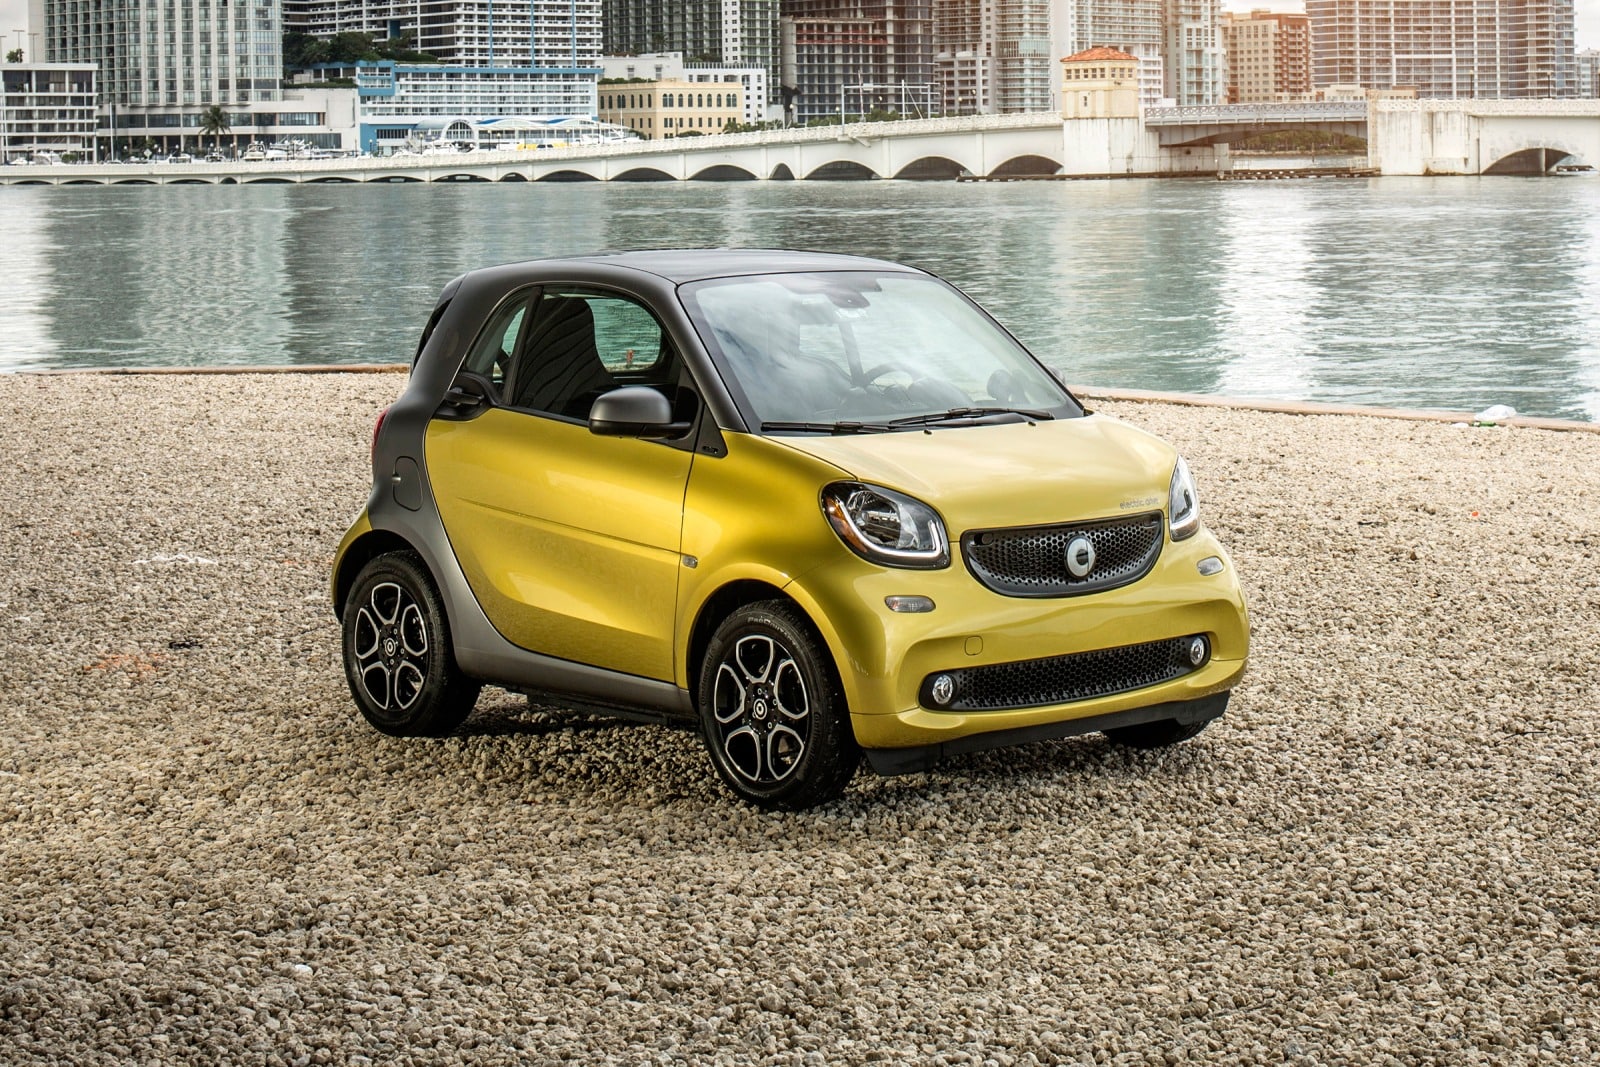 2017 smart fortwo Review & Ratings | Edmunds